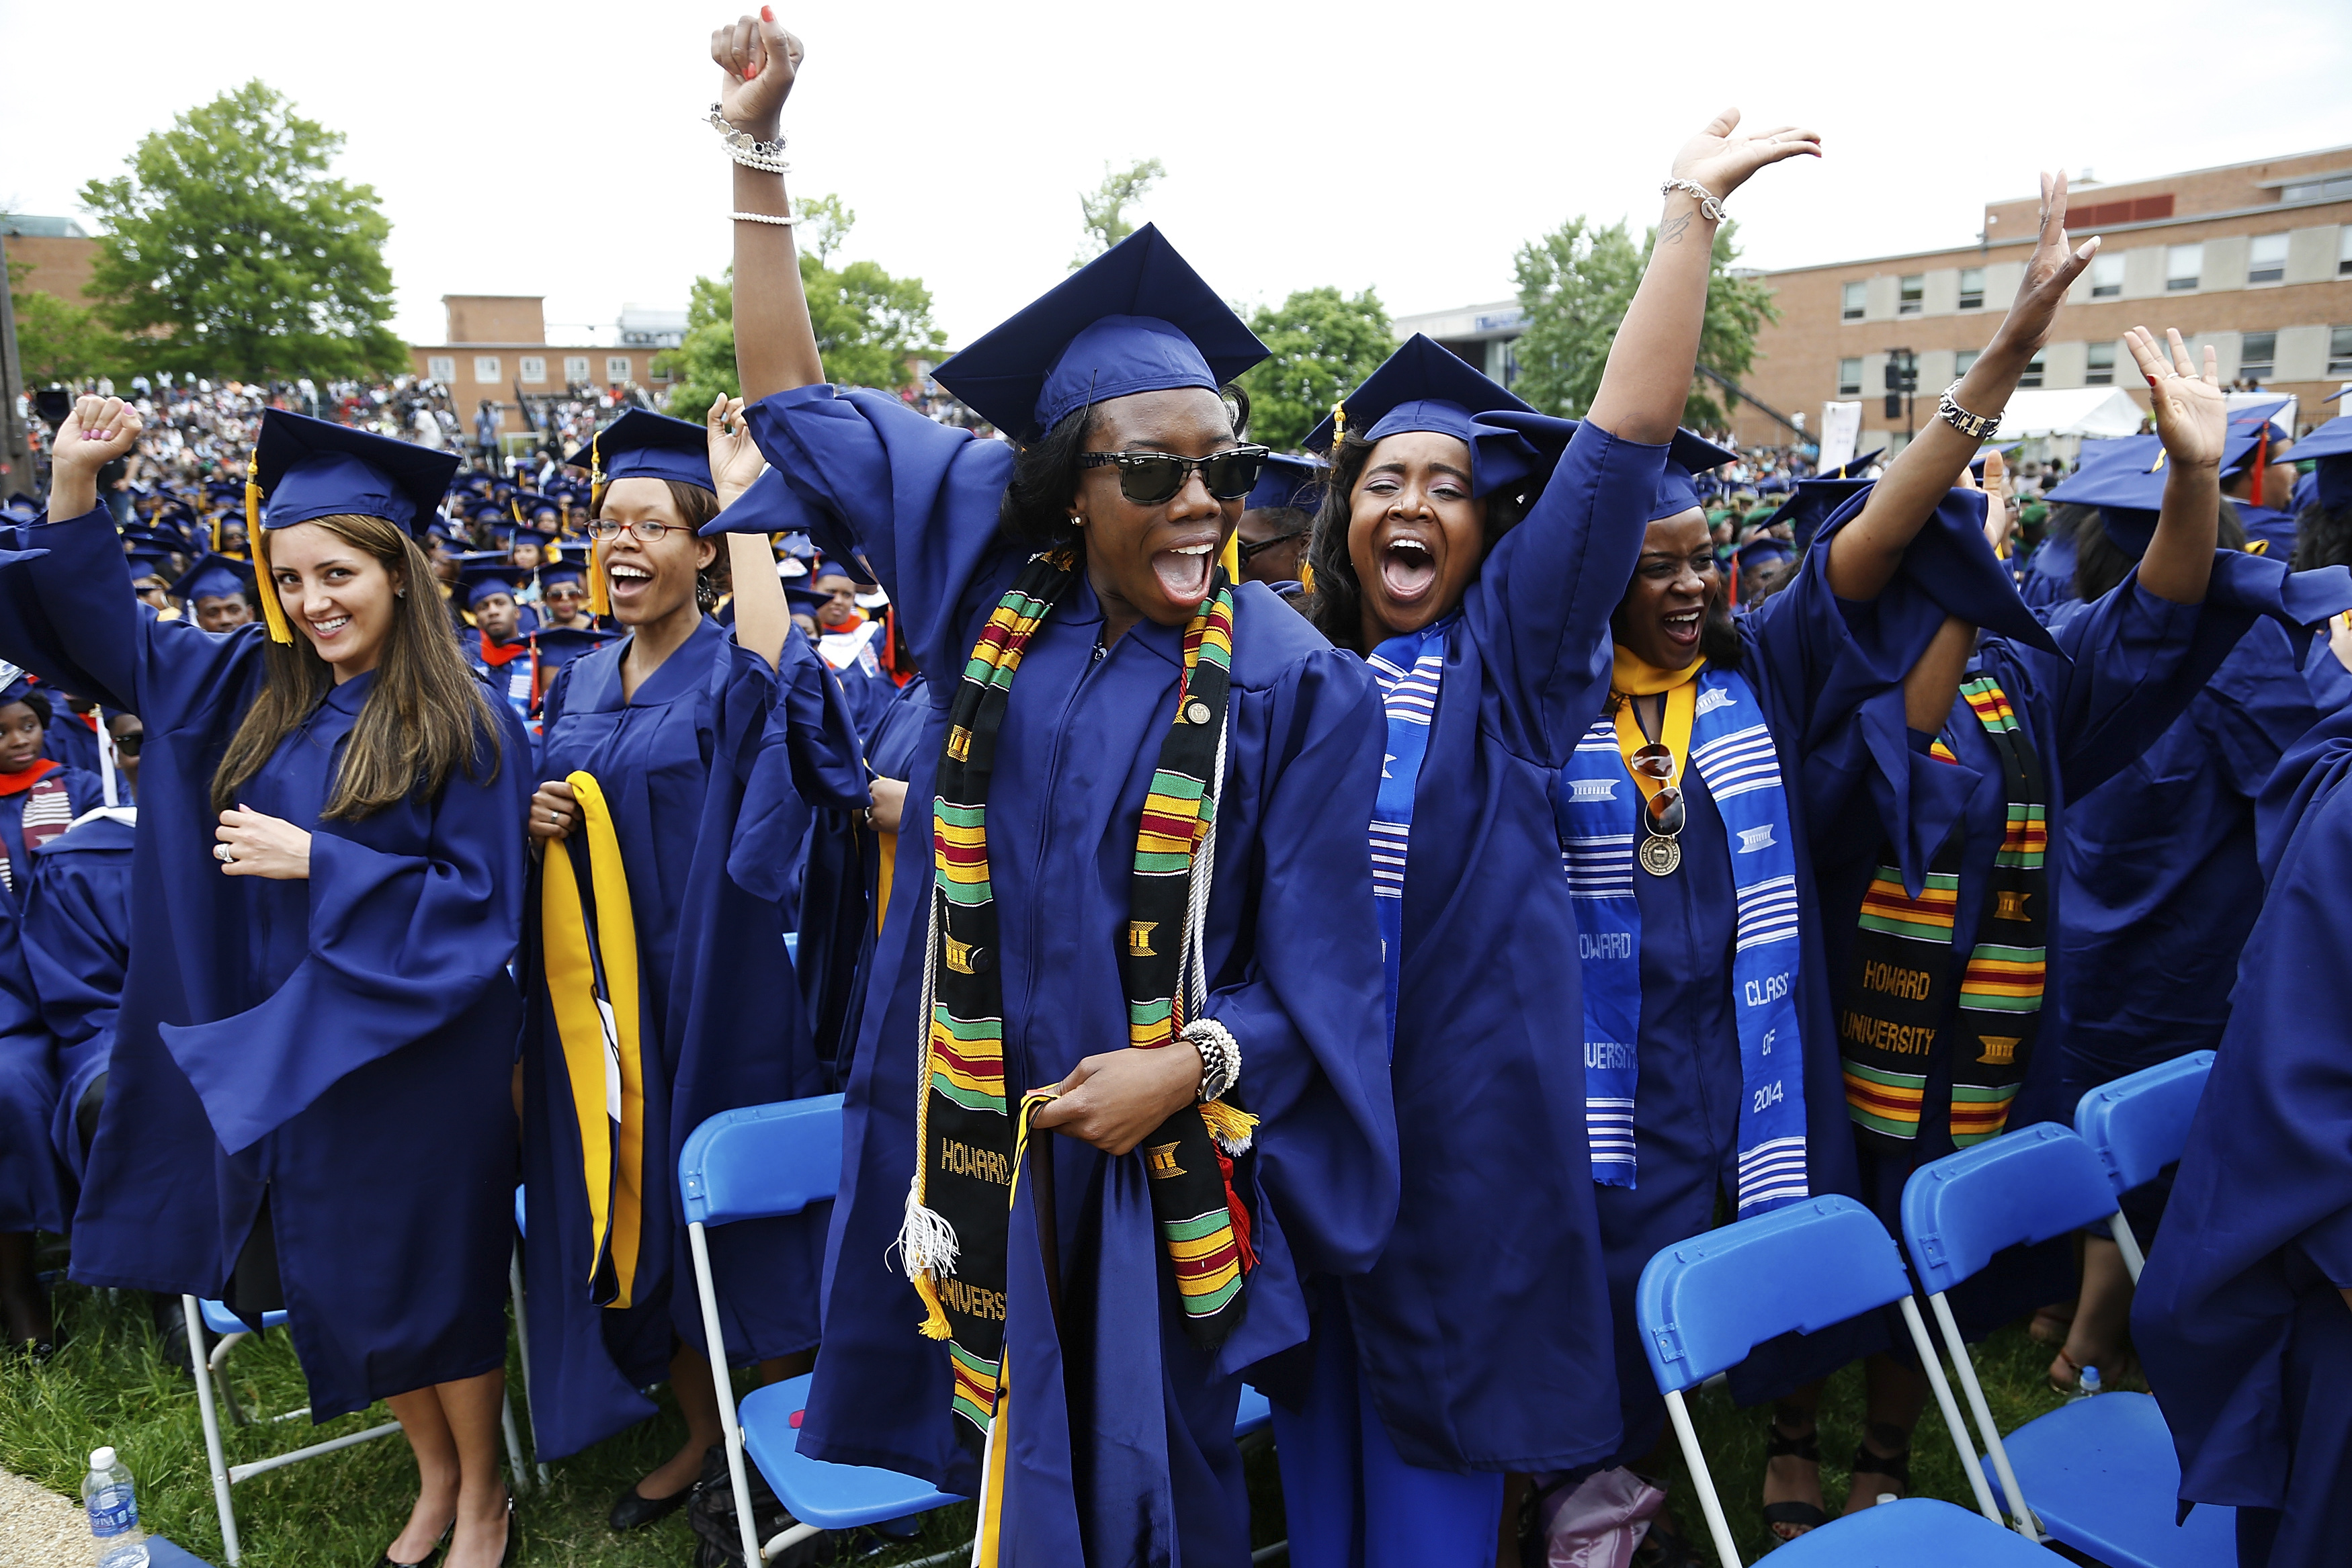 Graduates celebrate during the 2014 graduation ceremonies at Howard University, a well-known HBCU, in Washington on May 10, 2014. (Jonathan Ernst—Reuters)